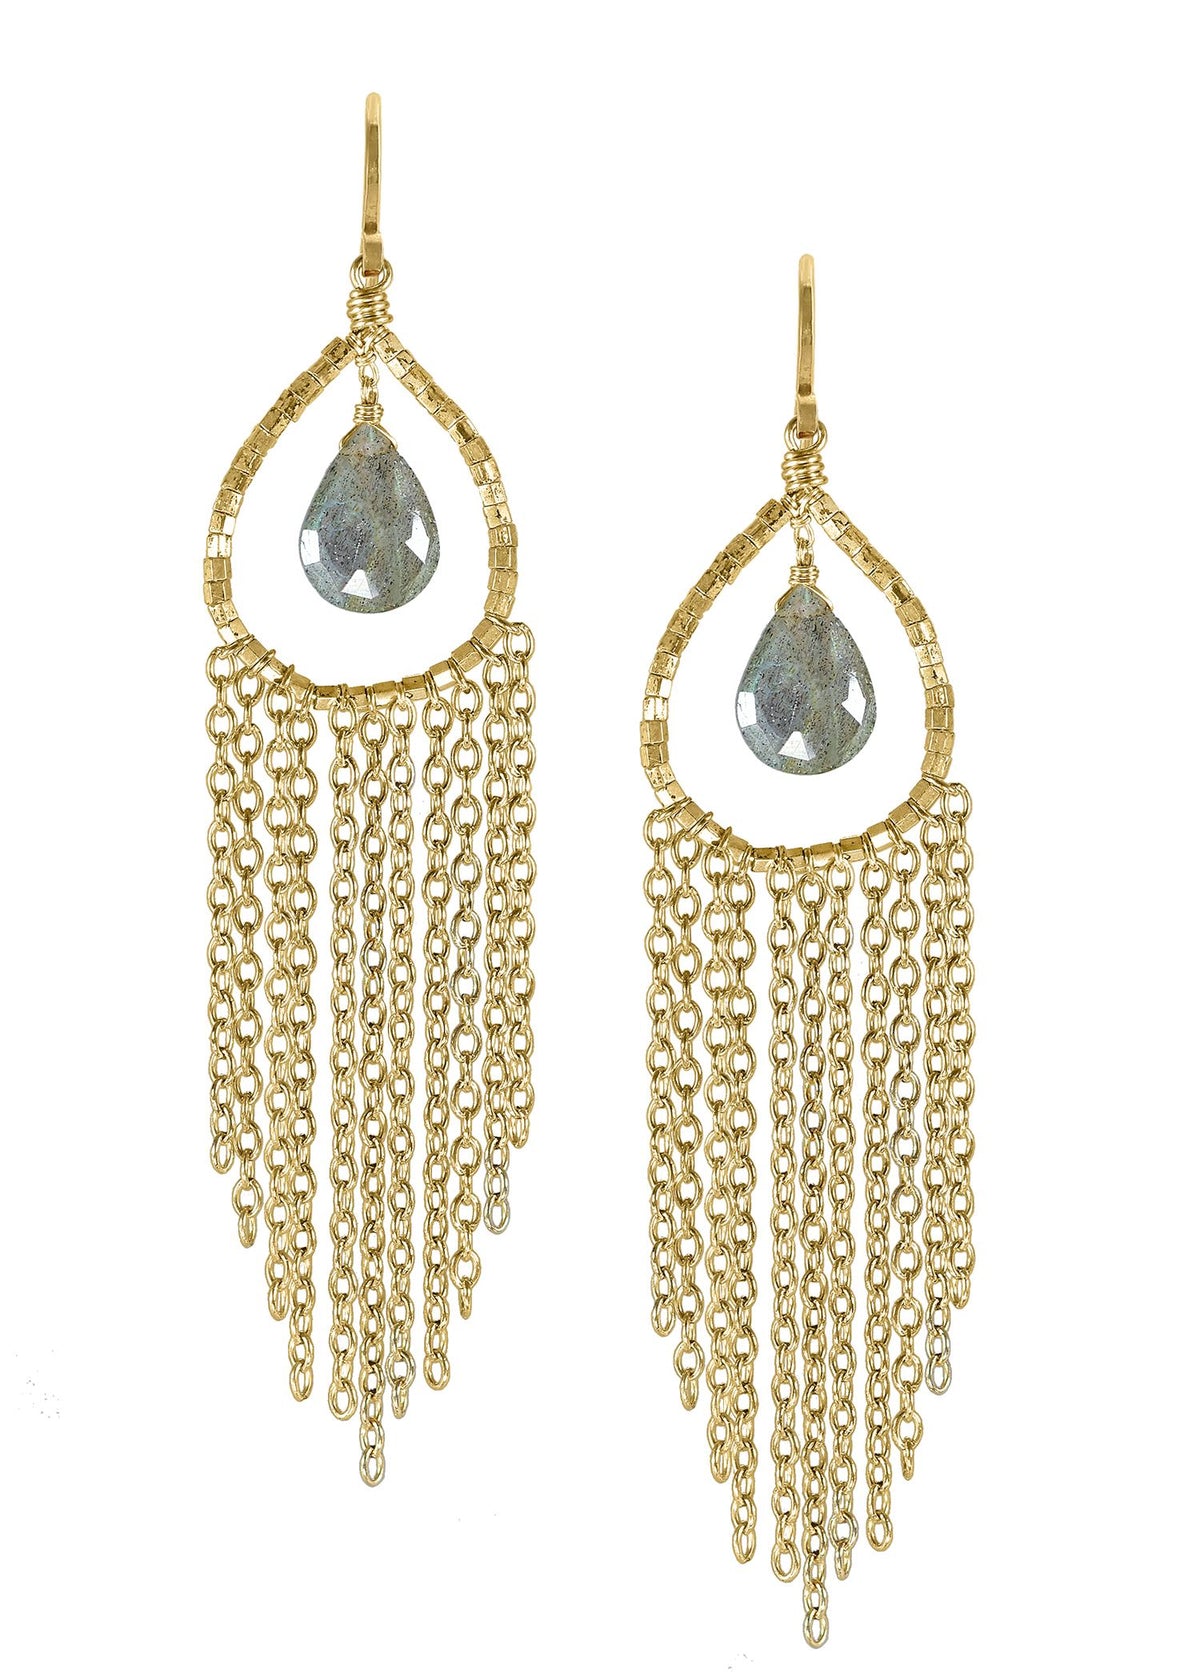 Labradorite 14k gold fill Earrings measure 3-1/8&quot; in length (including the ear wires) and 11/16&quot; in width Handmade in our Los Angeles studio